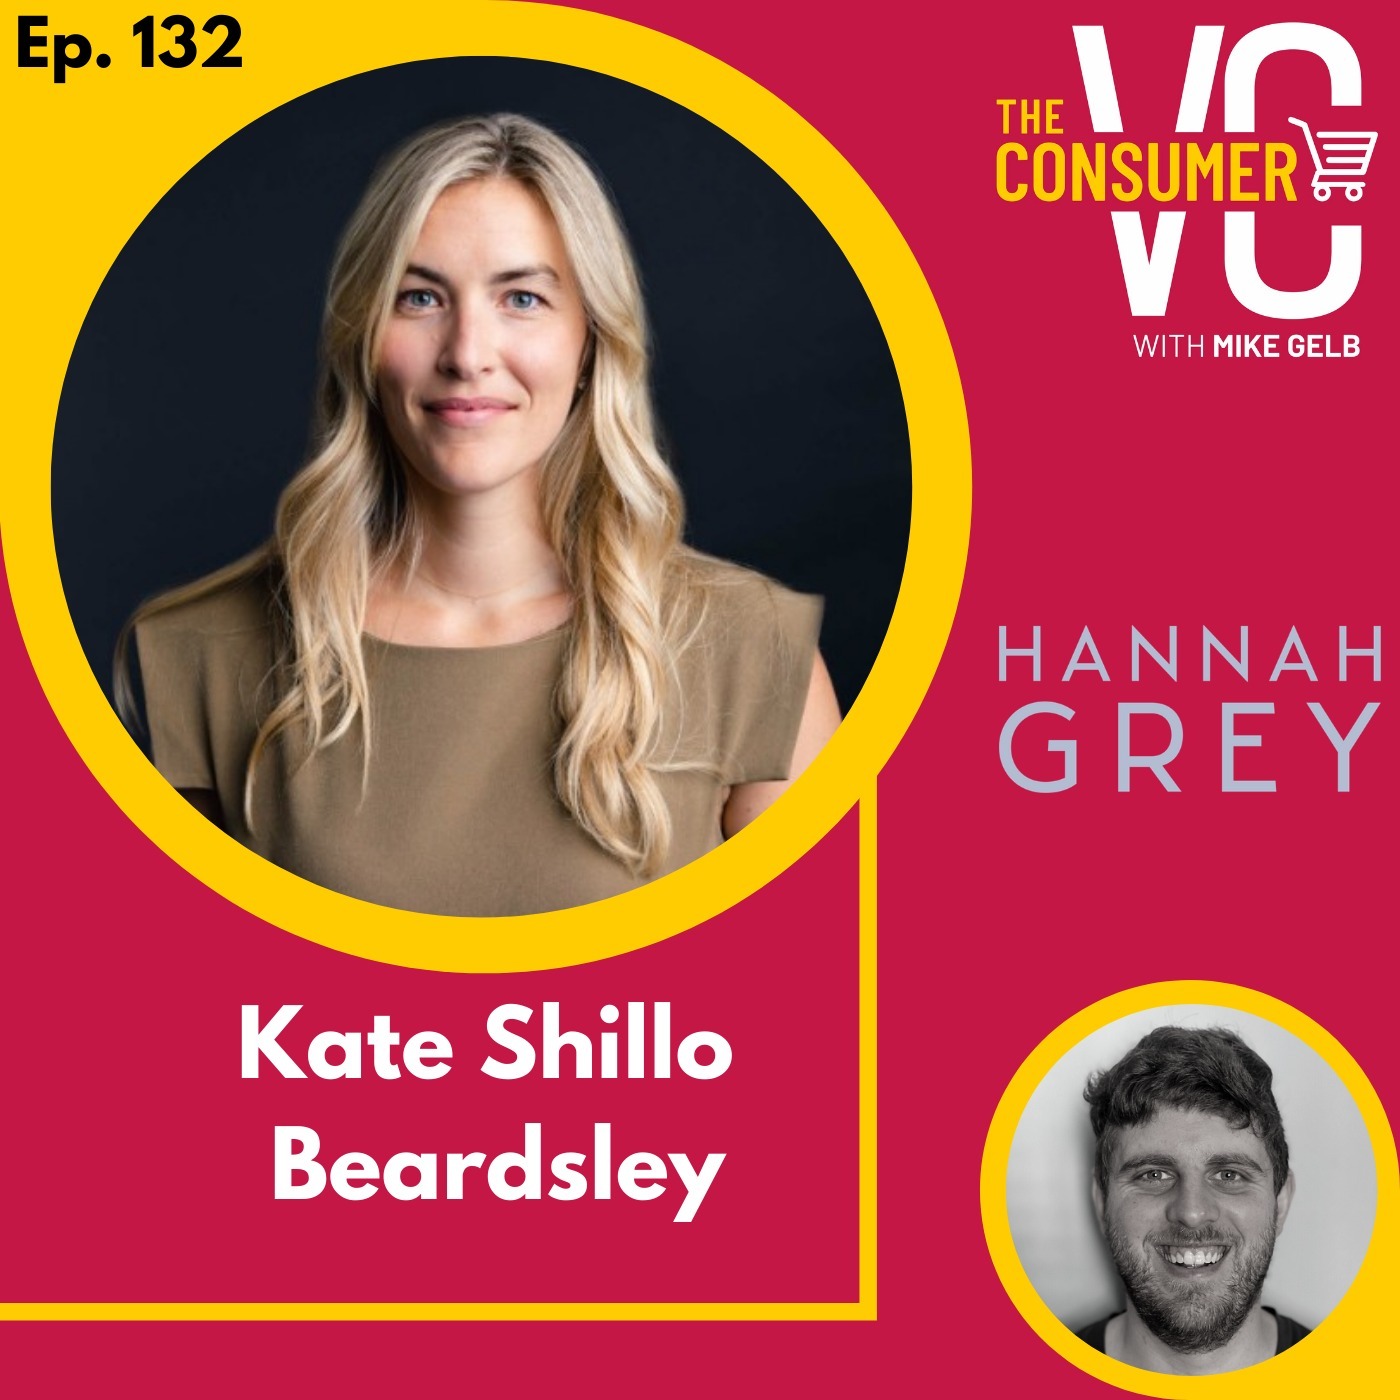 Kate Shillo Beardsley (Hannah Grey) - The early days of venture capital in New York, learning from Martha Stewart, and the creator economy